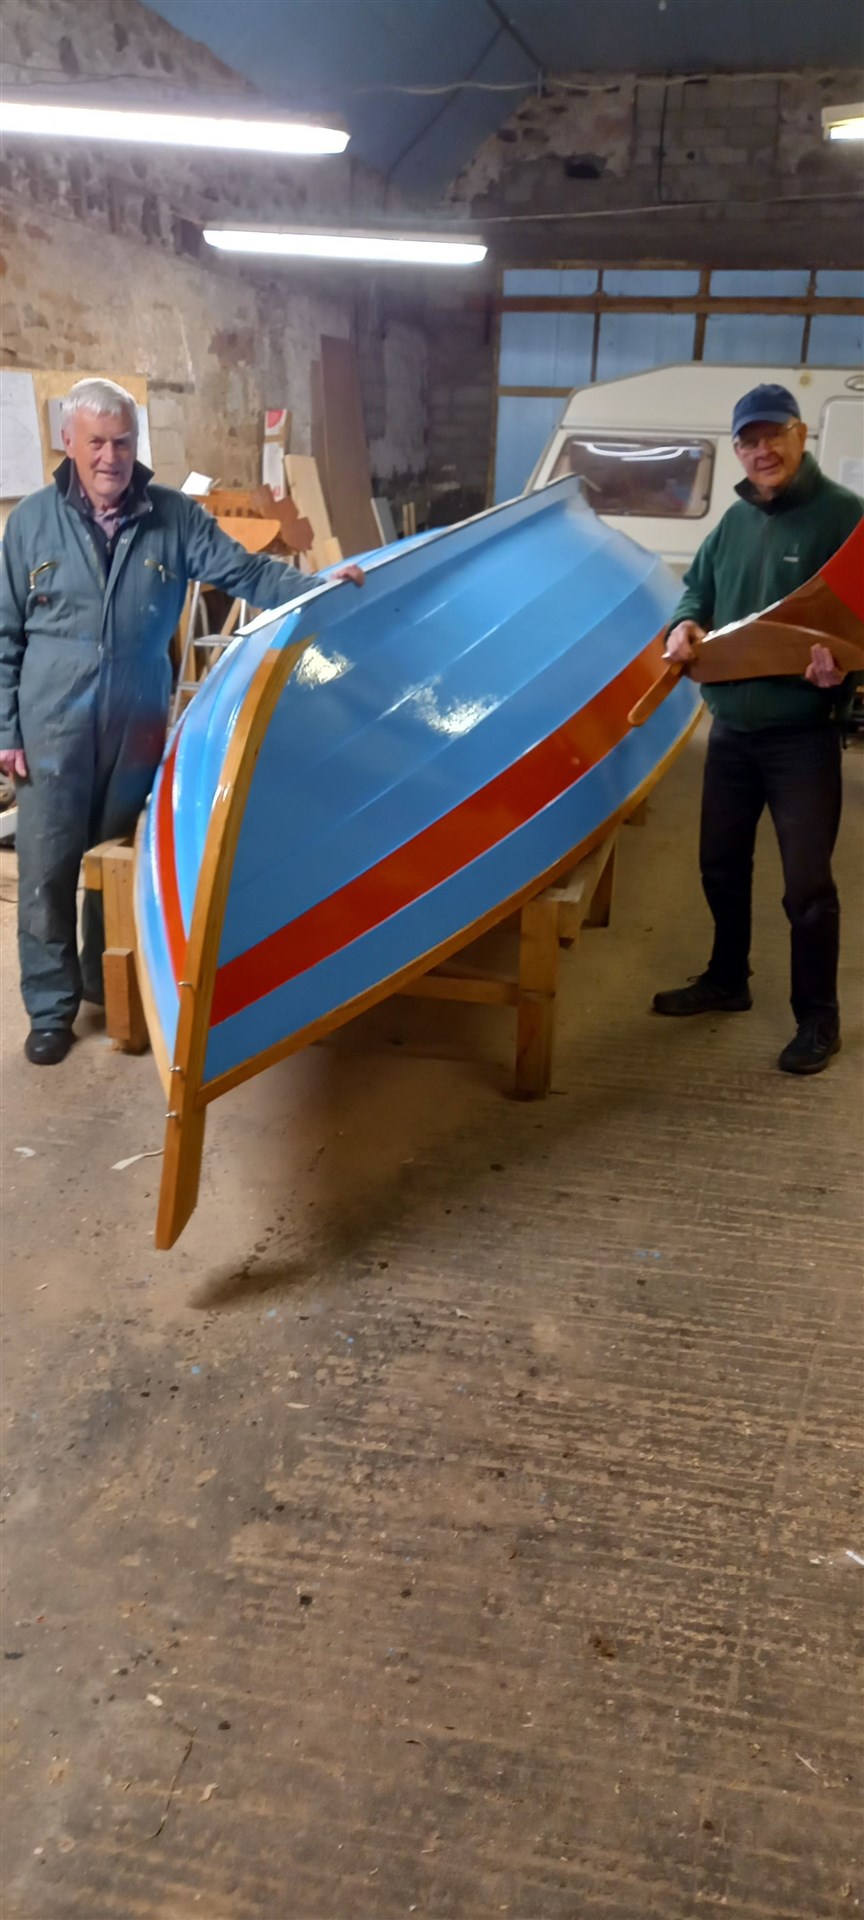 The new skiff nearing completion. Angus MacInnes (left) in charge of the build and Rob Raynor (right) one of the team of volunteer builders.